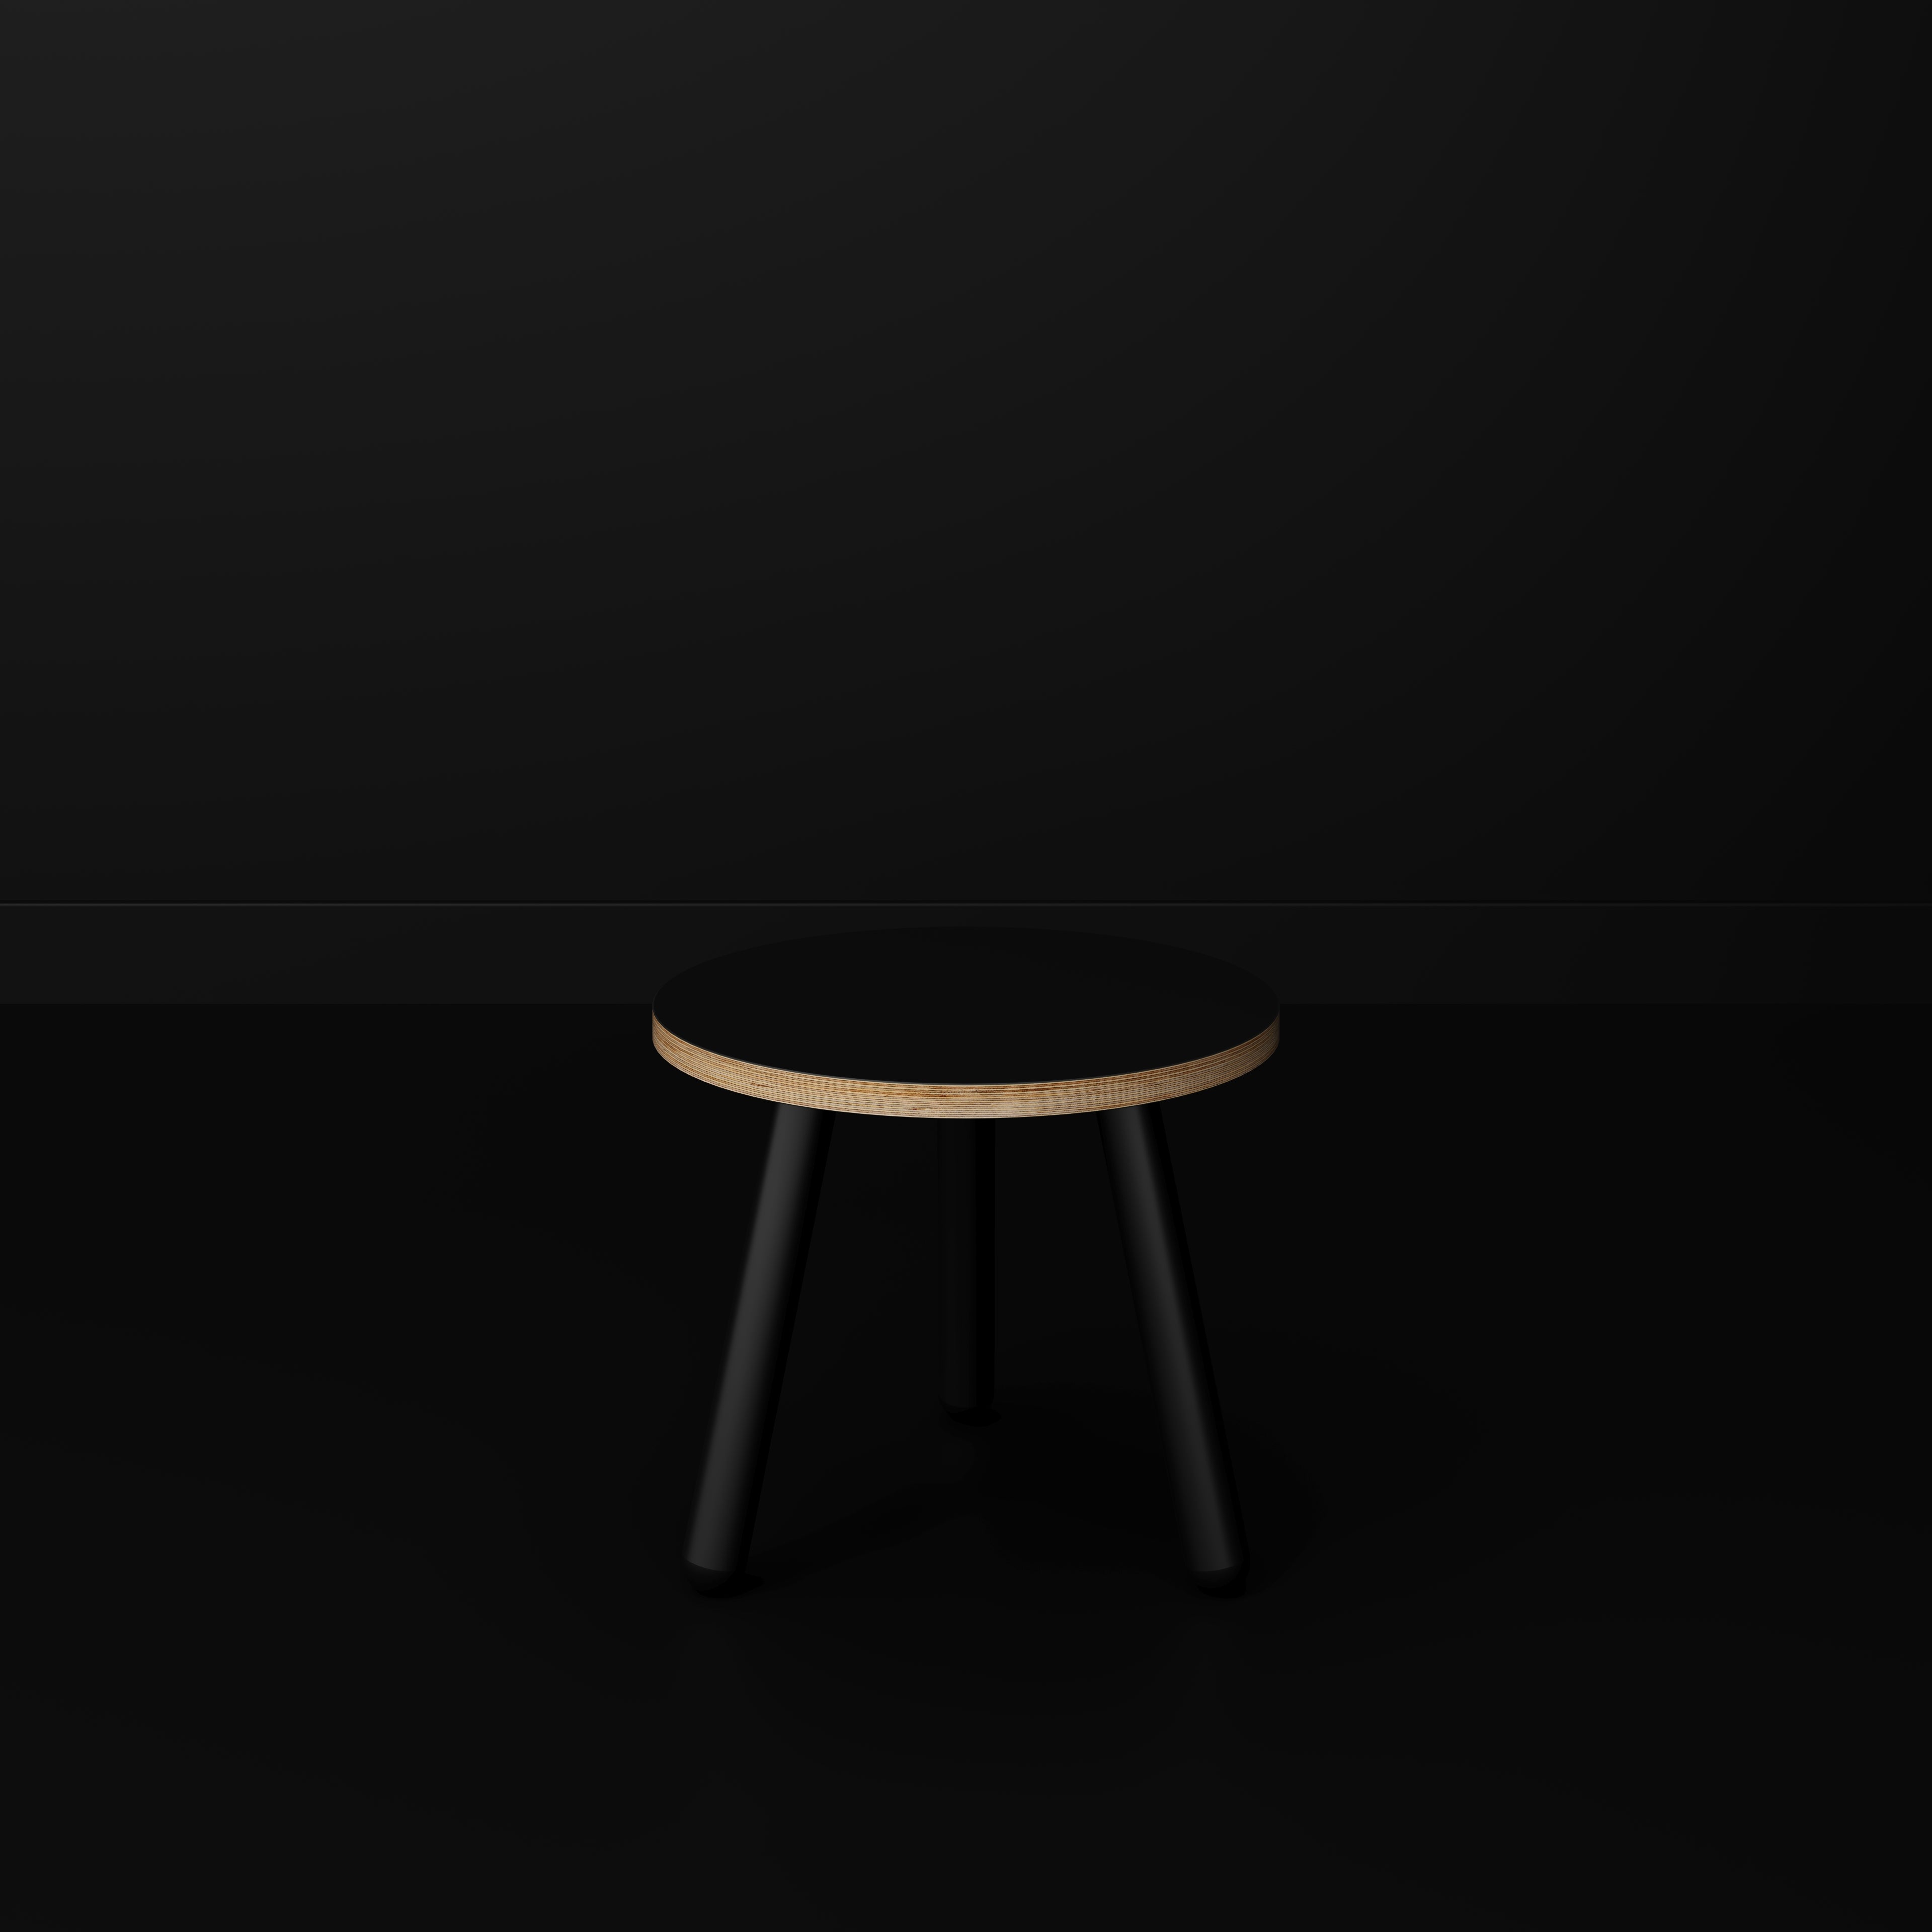 Round Side Table with Black Round Single Pin Legs - Formica Diamond Black - 500(w) x 500(d) x 425(h)